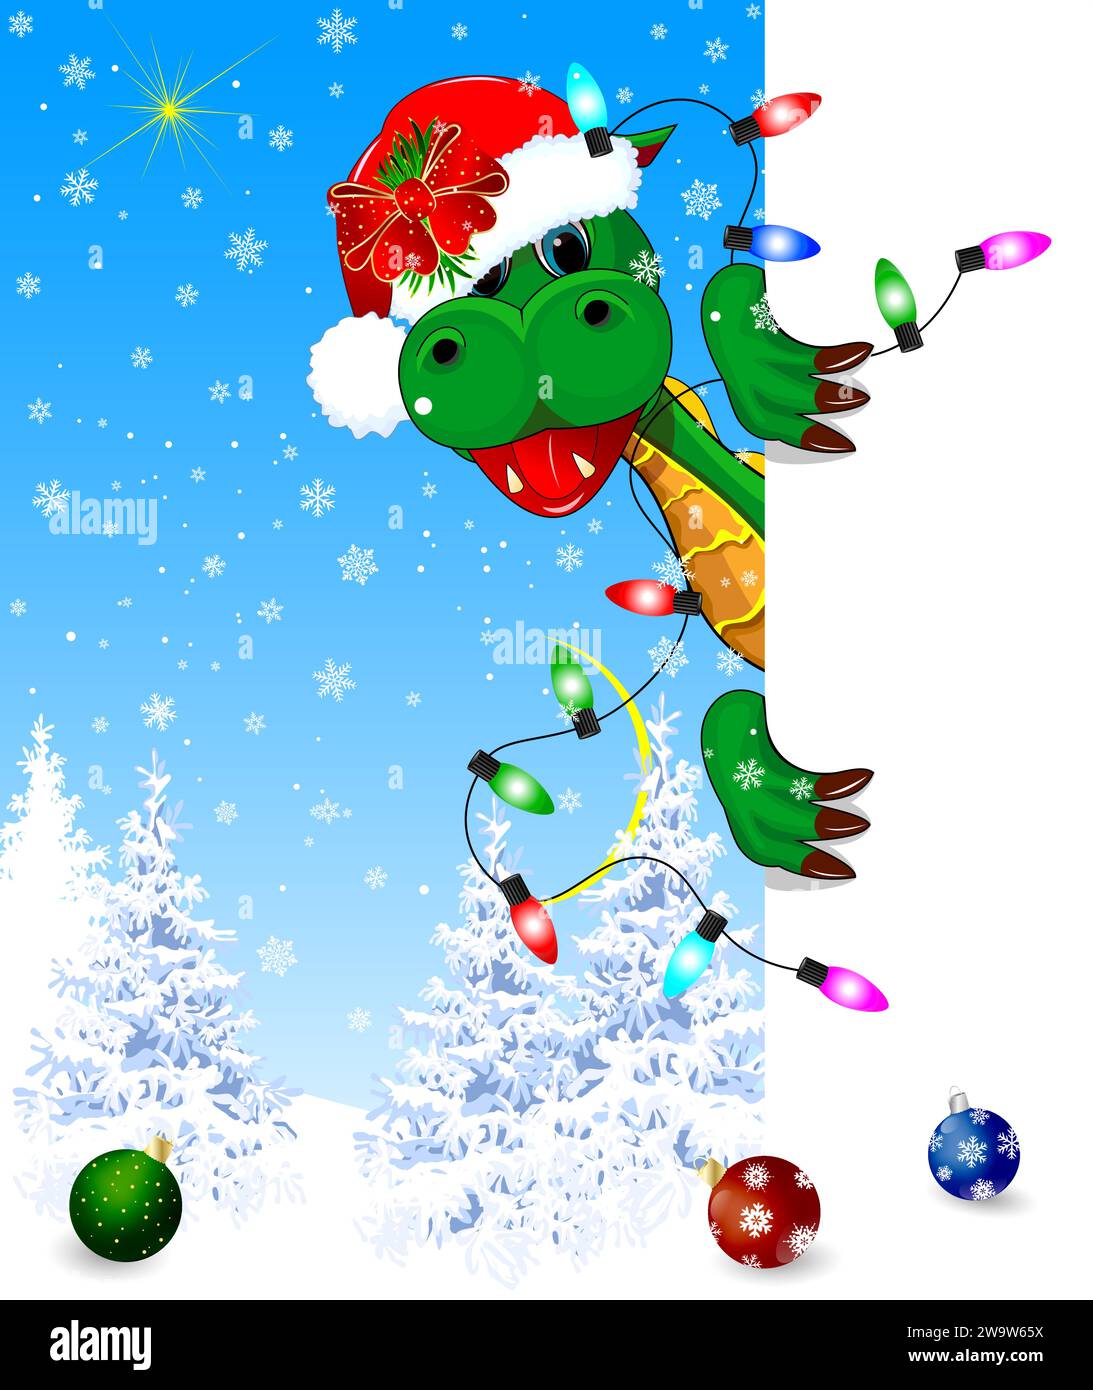 Cute funny cartoon dragon in the background of a winter snowy forest. Fairytale character. Green dinosaur. Stock Vector